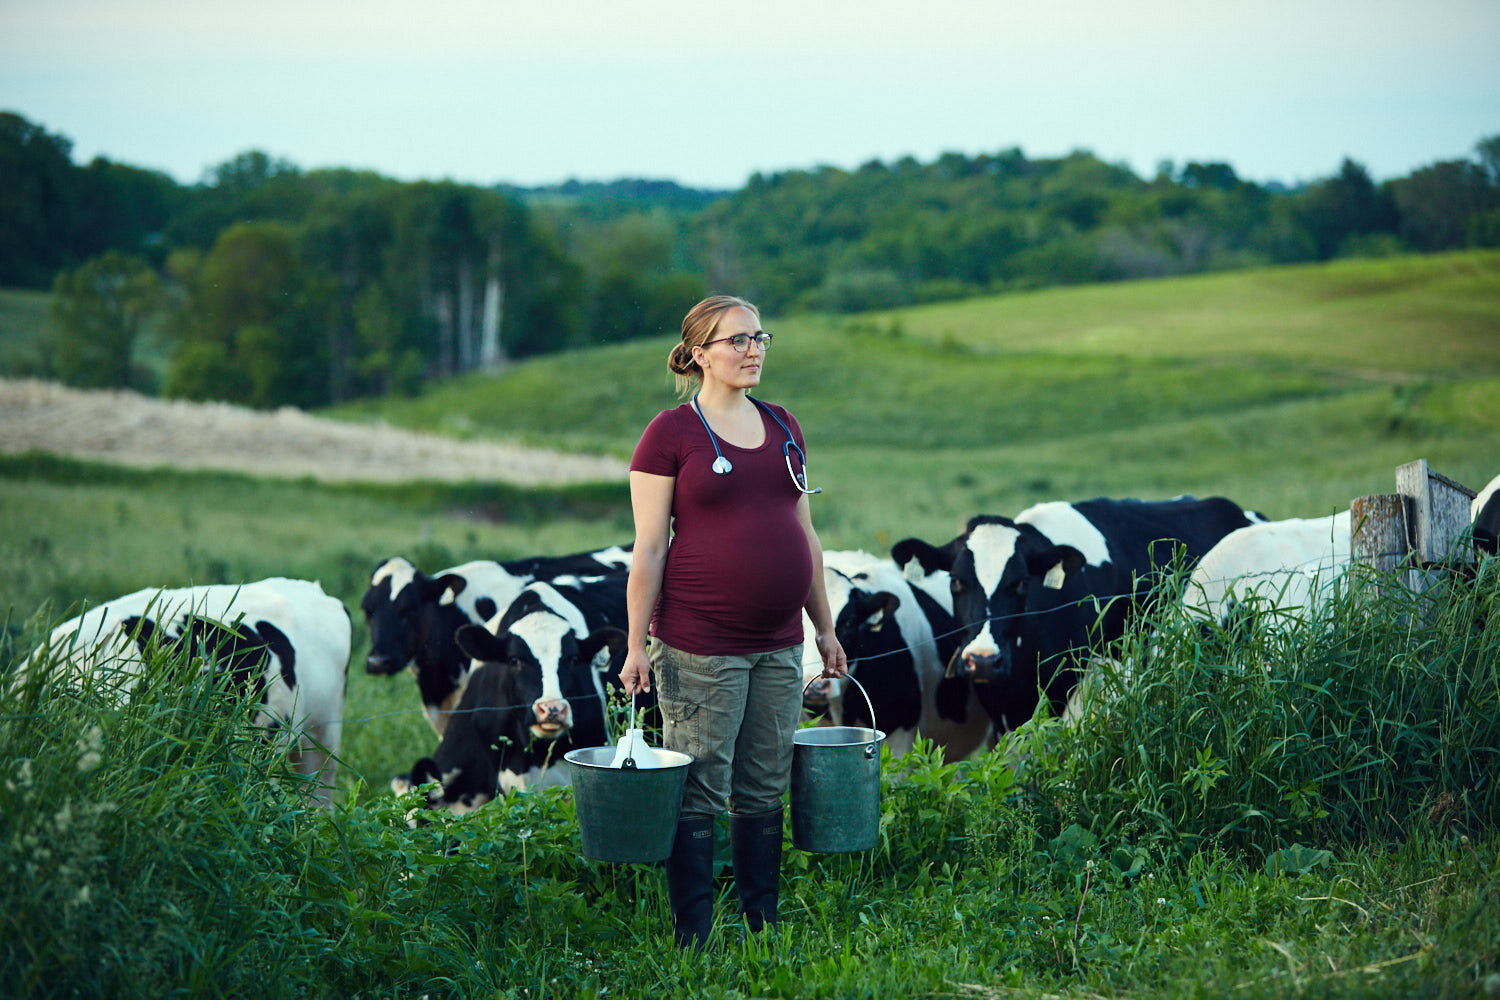 beautiful maternity portrait of livestock vet in a field with cows by creative portrait photographer Hanna Agar